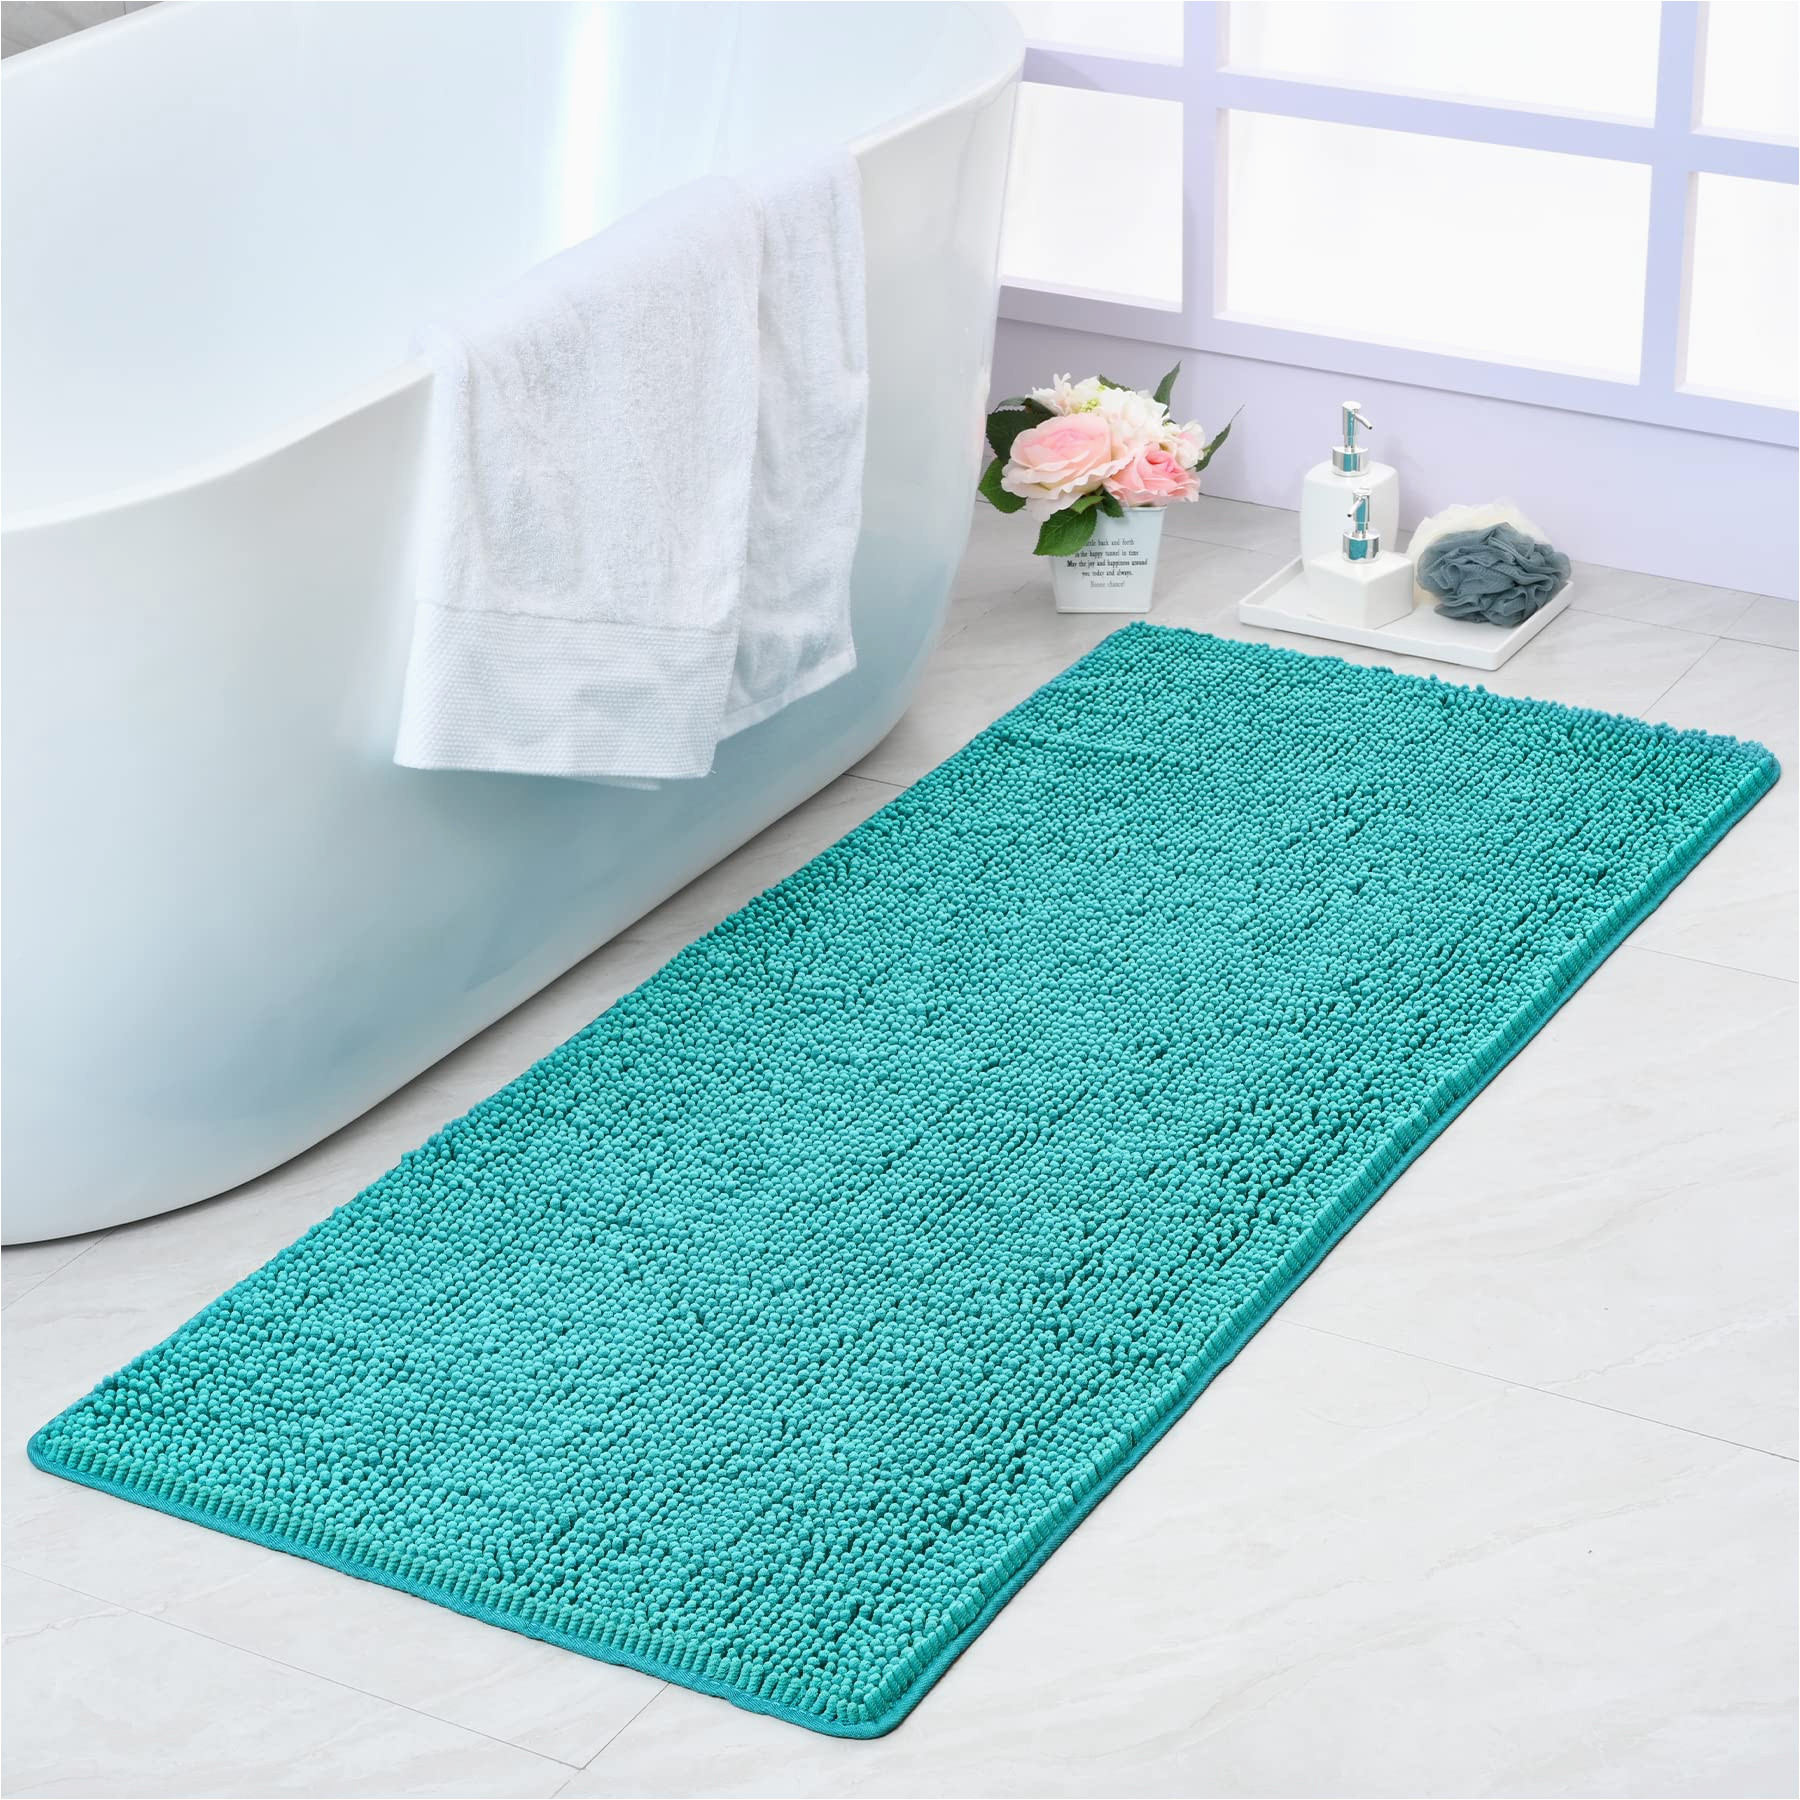 Bed Bath and Beyond Bath Rug Sets Noahas Bath Rugs 24” X 60” Large Runner Bathroom Rug, soft Luxury Chenille Bathroom Mats with Non-slip Backing, Throw Absorbent Carpet for Bath …